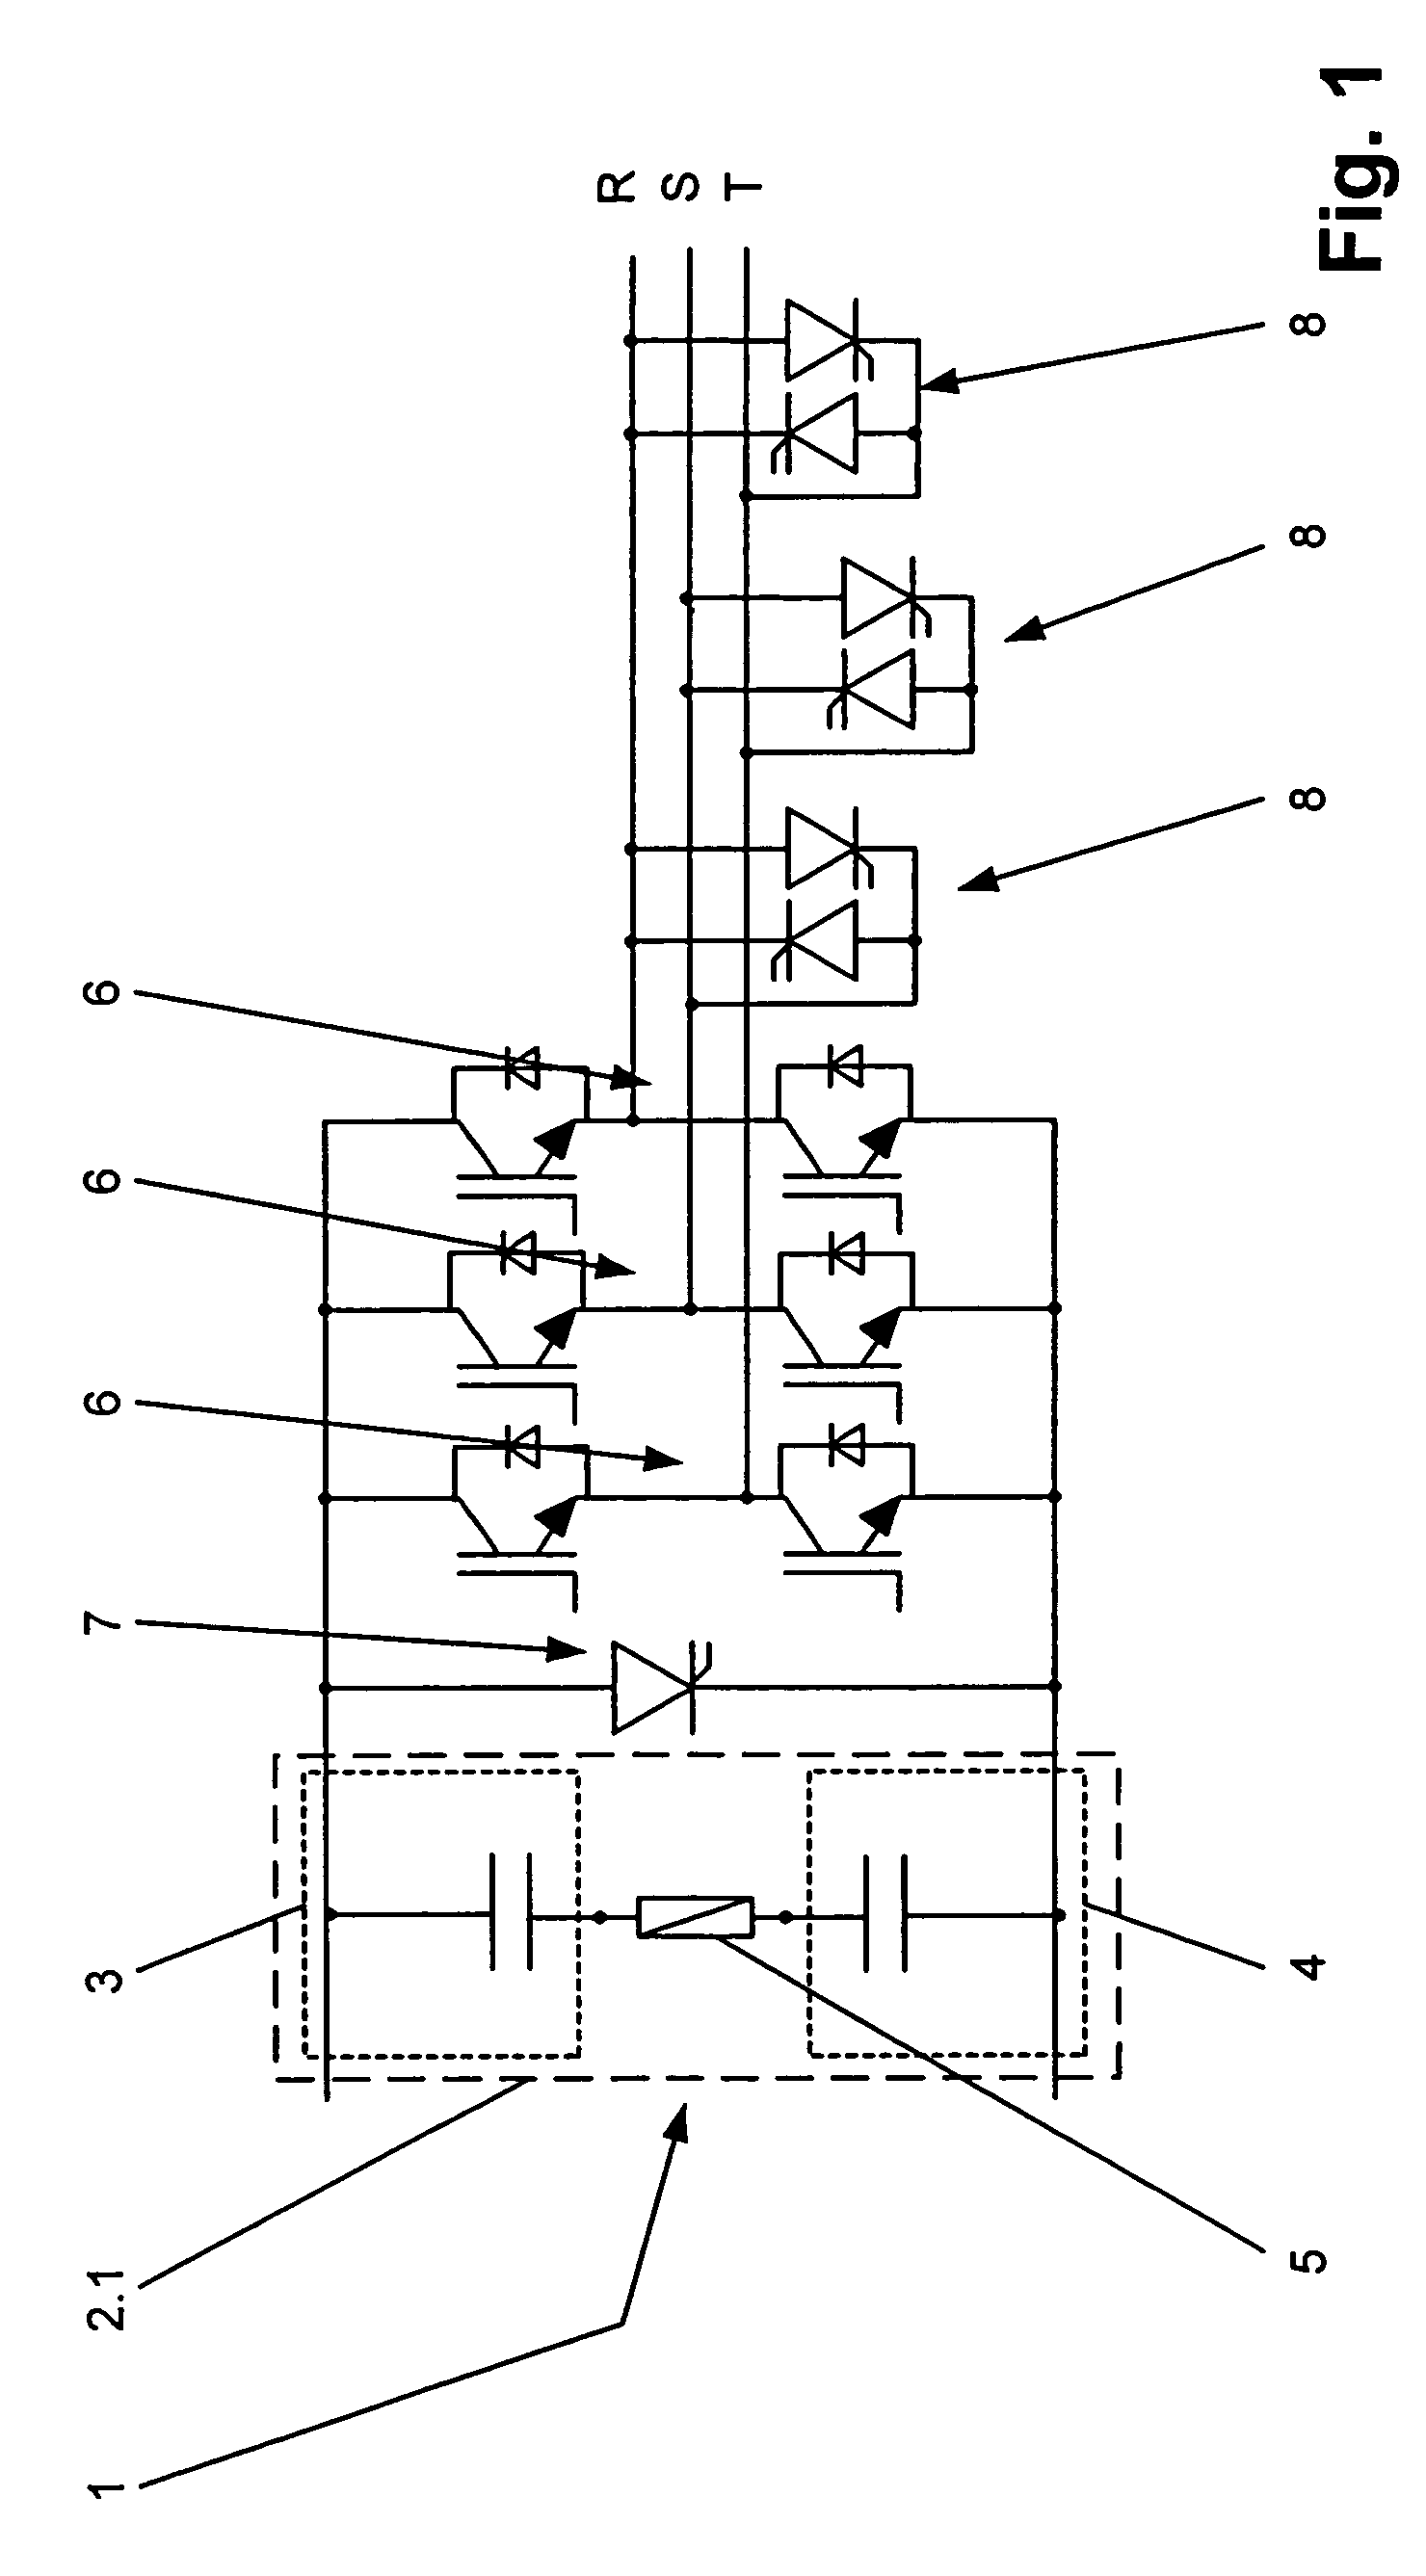 Converter circuit with short-circuit current protection